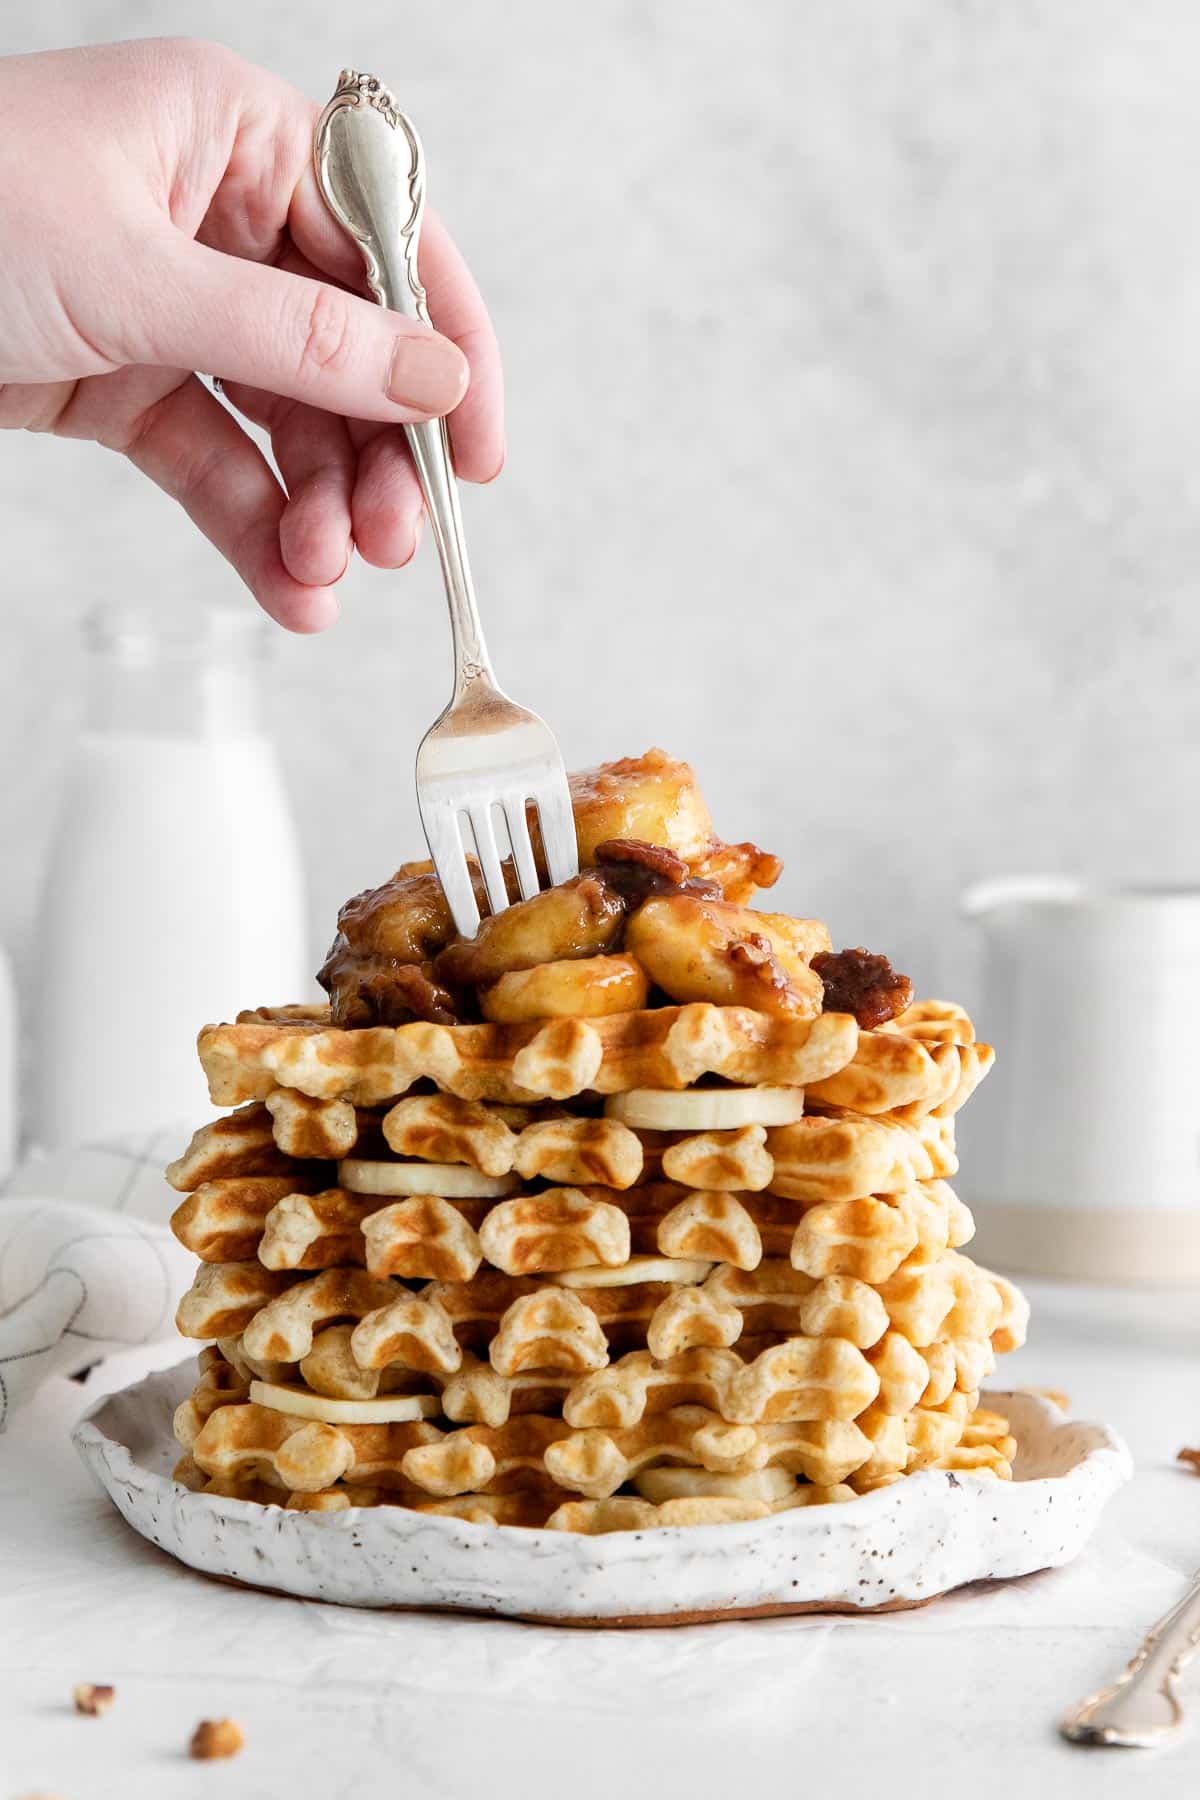 stack of waffles with bananas foster topping.